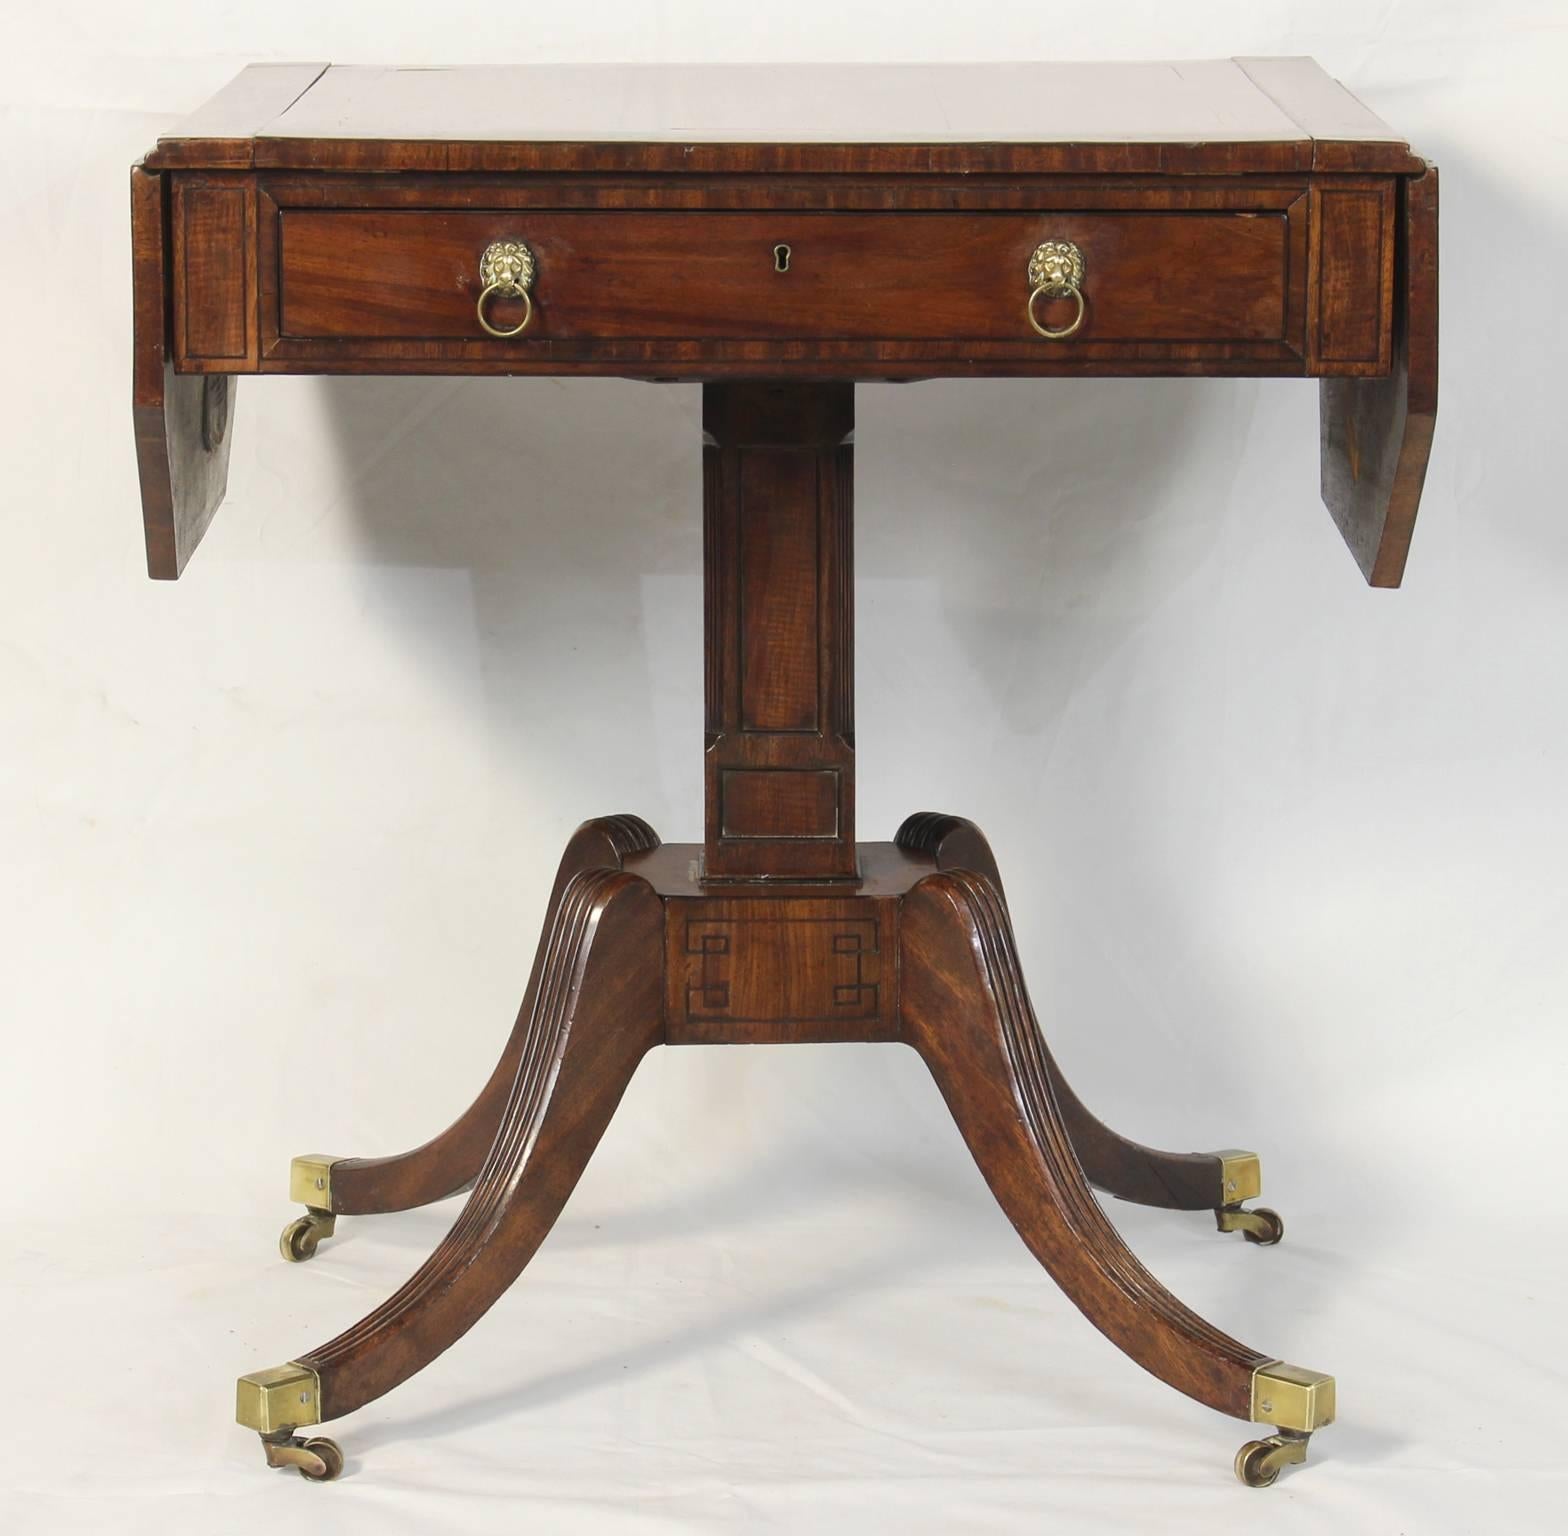 Early 19th Century English Regency Articulated Top Library Table